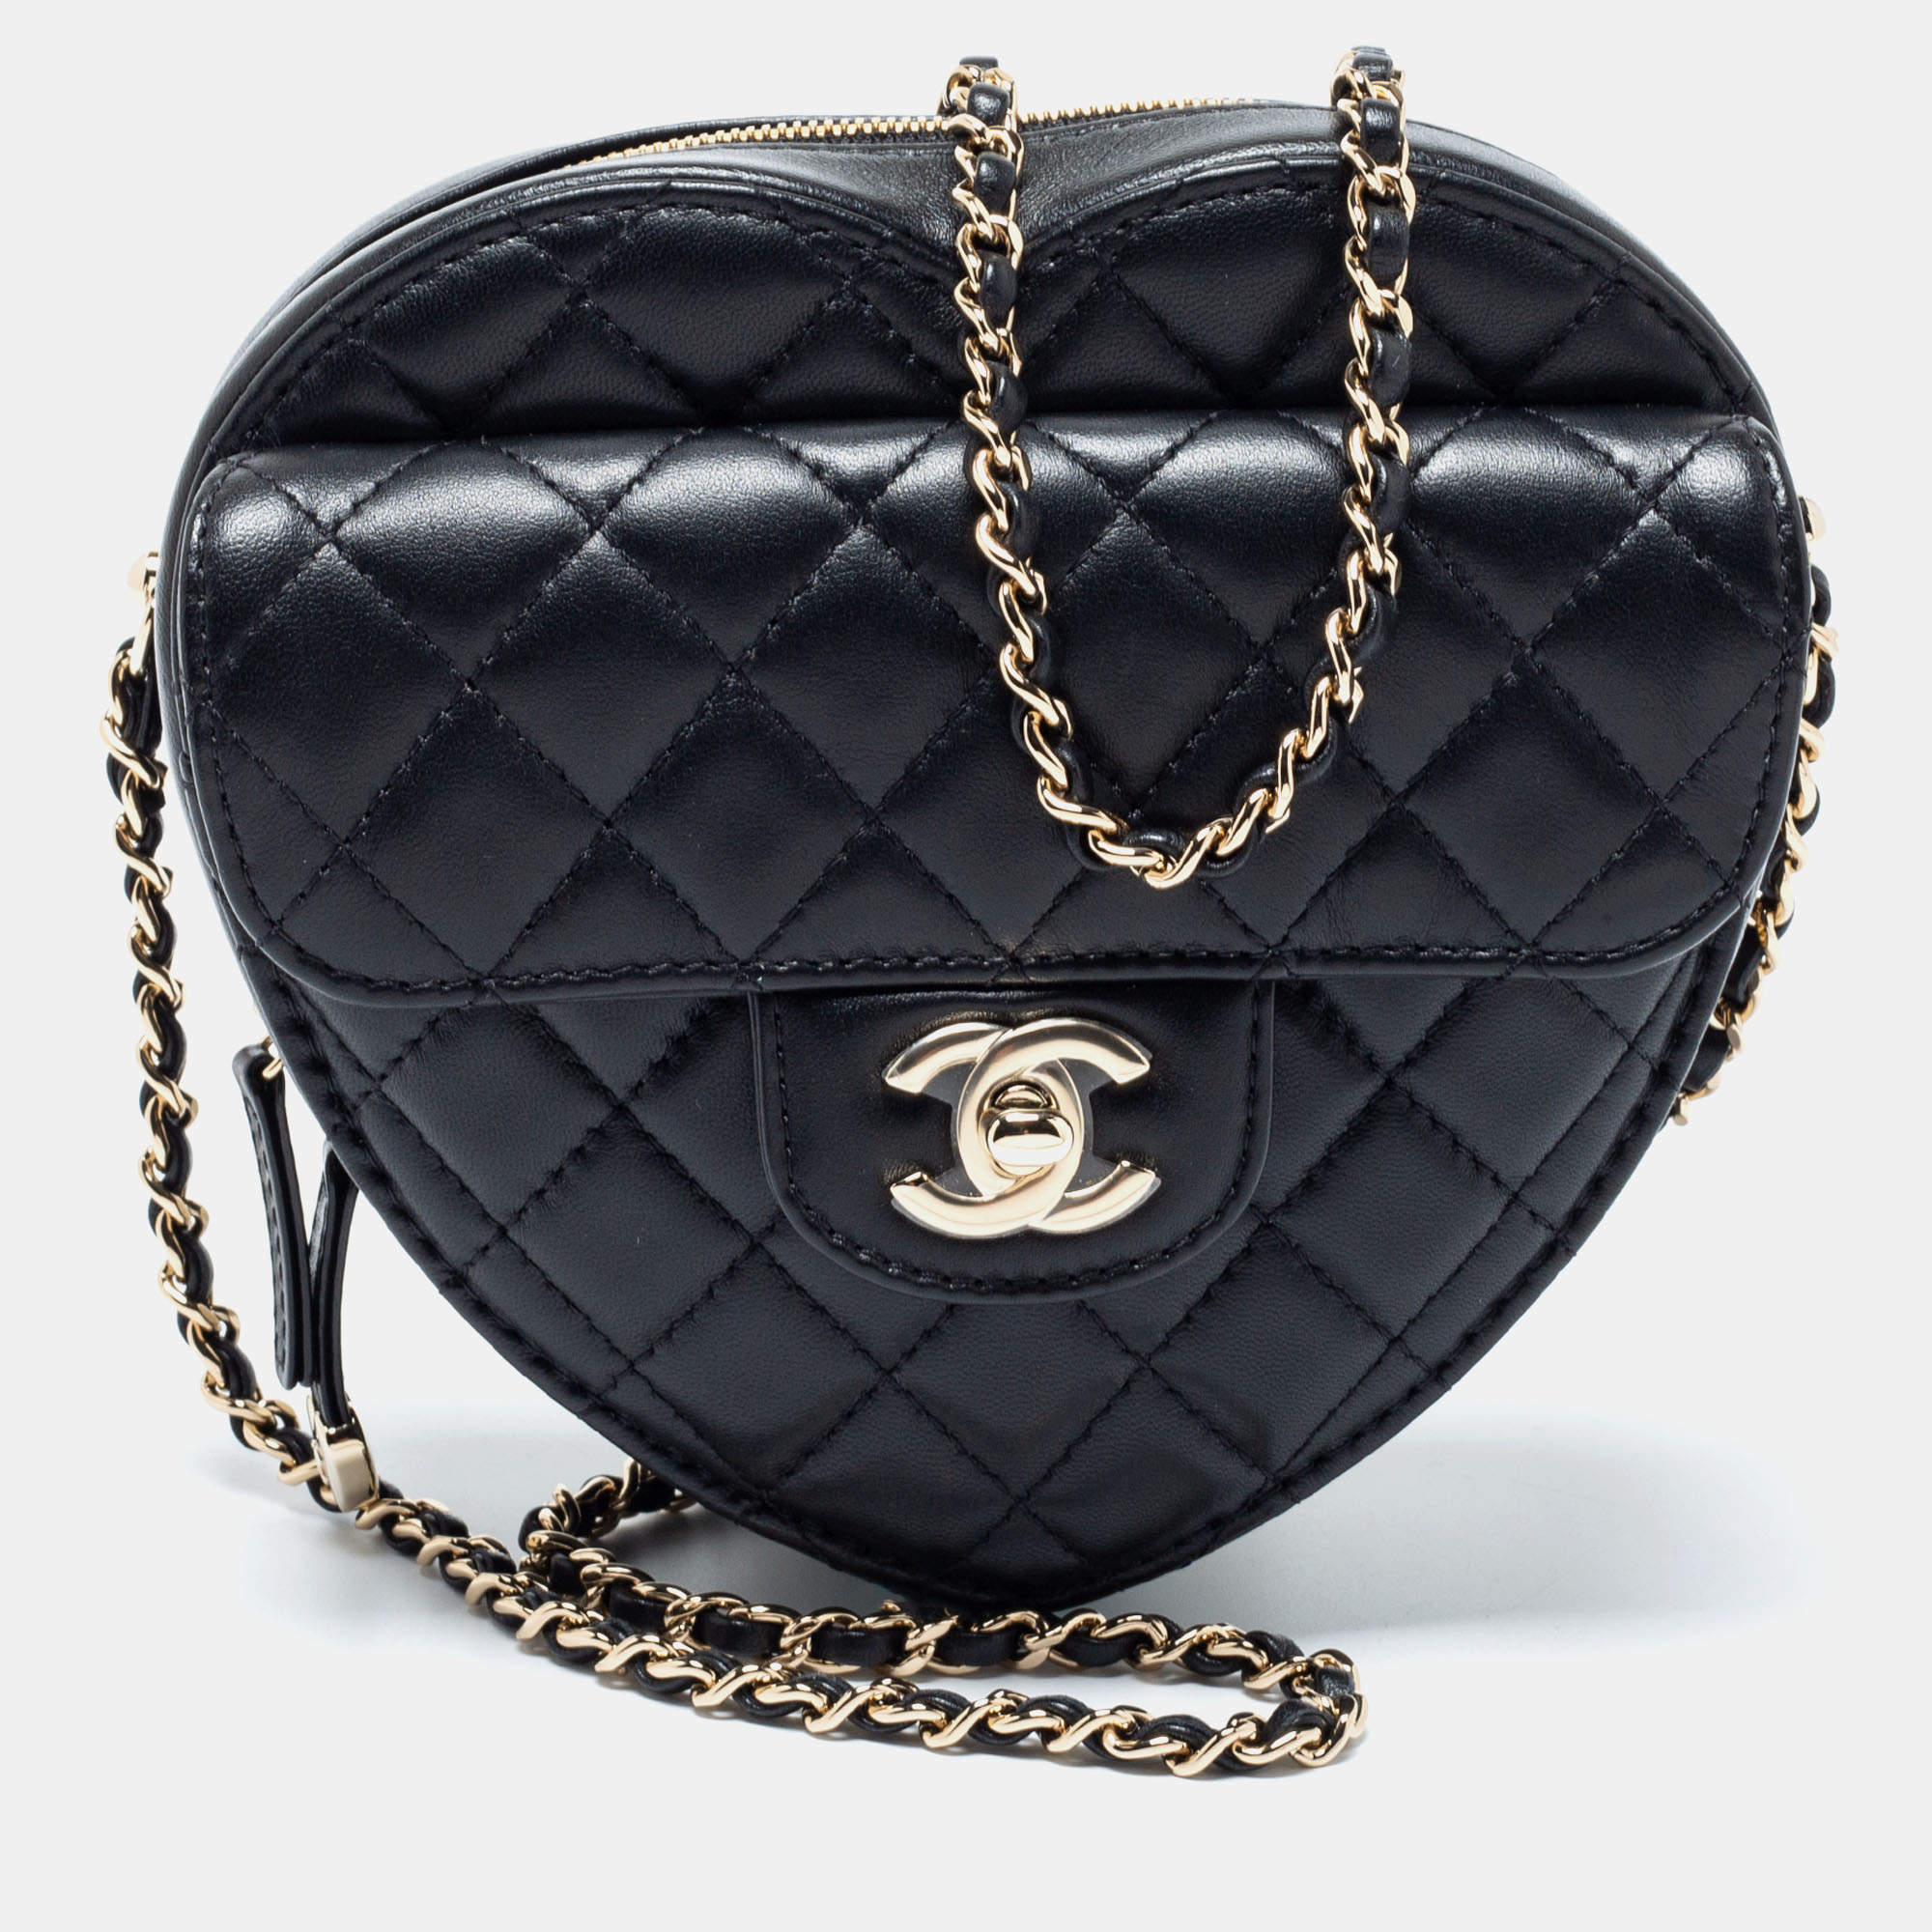 Chanel Black Quilted Leather Classic Heart Bag Chanel